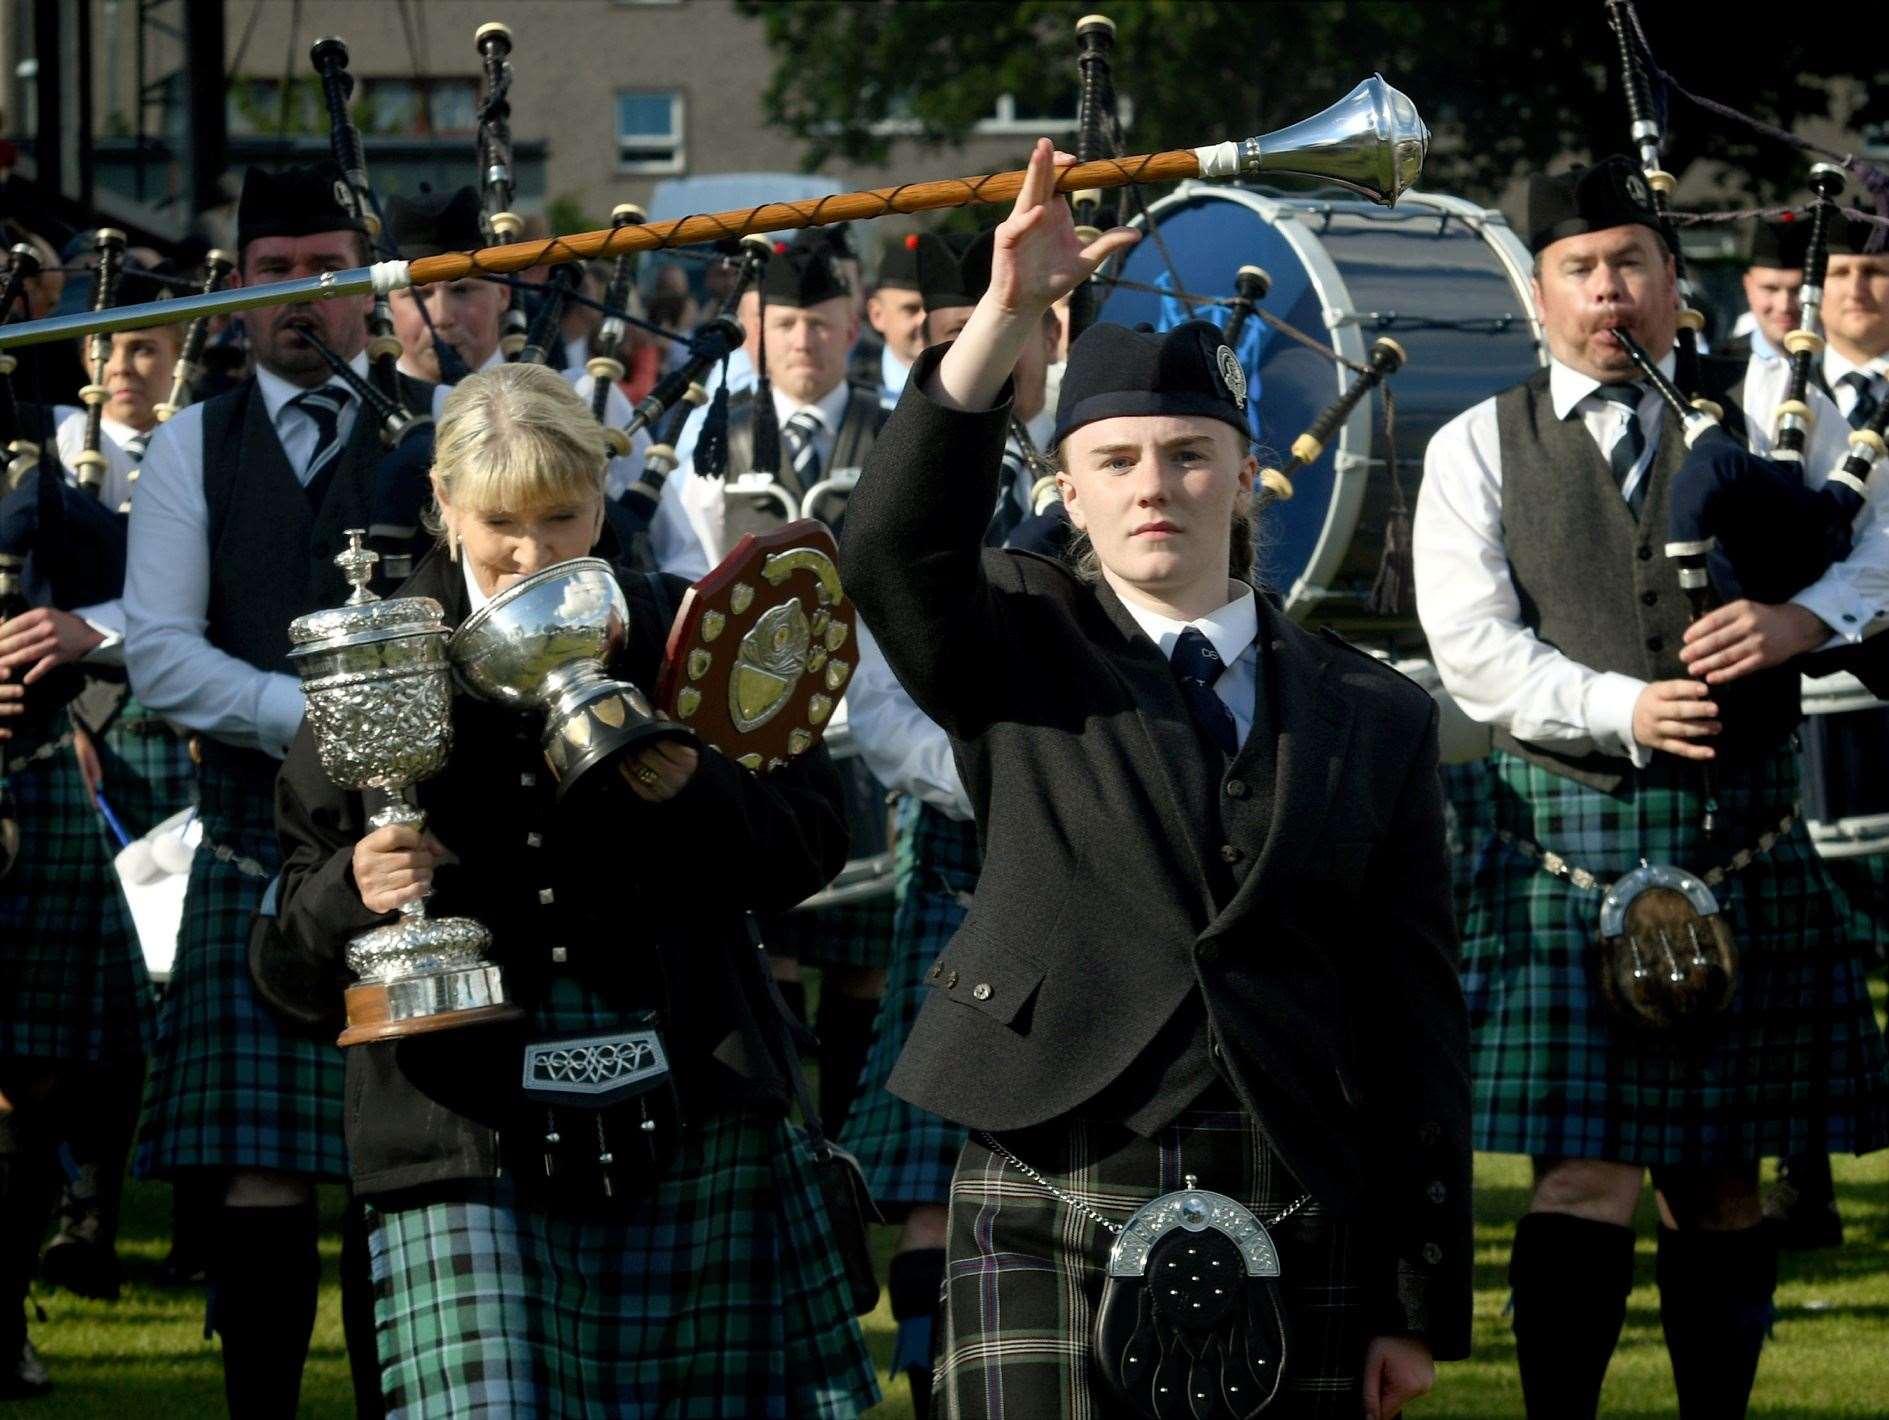 Inveraray drum major leading the way with the trophies following behind. Picture: James Mackenzie.